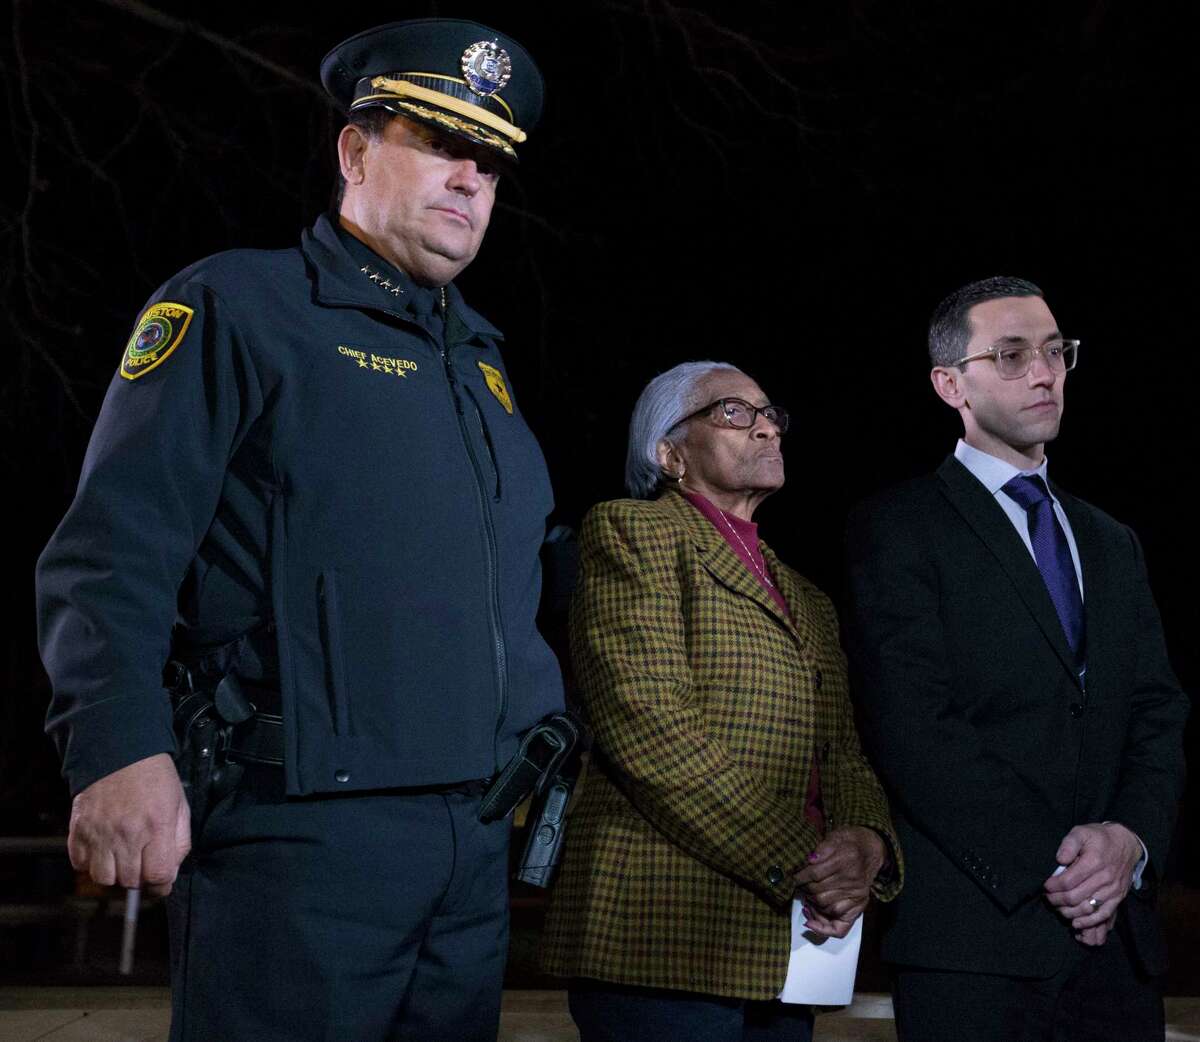 Houston Police Chief Art Acevedo, from left, Era Howard, mother of murdered officer Elston Howard, and Houston Police Officers' Union President Joseph Gamaldi are photographed during a press conference after Robert Jenning's execution on Wednesday, Jan. 30, 2019, in Huntsville. Howard was fatally shot by Jennings on July 19, 1988.